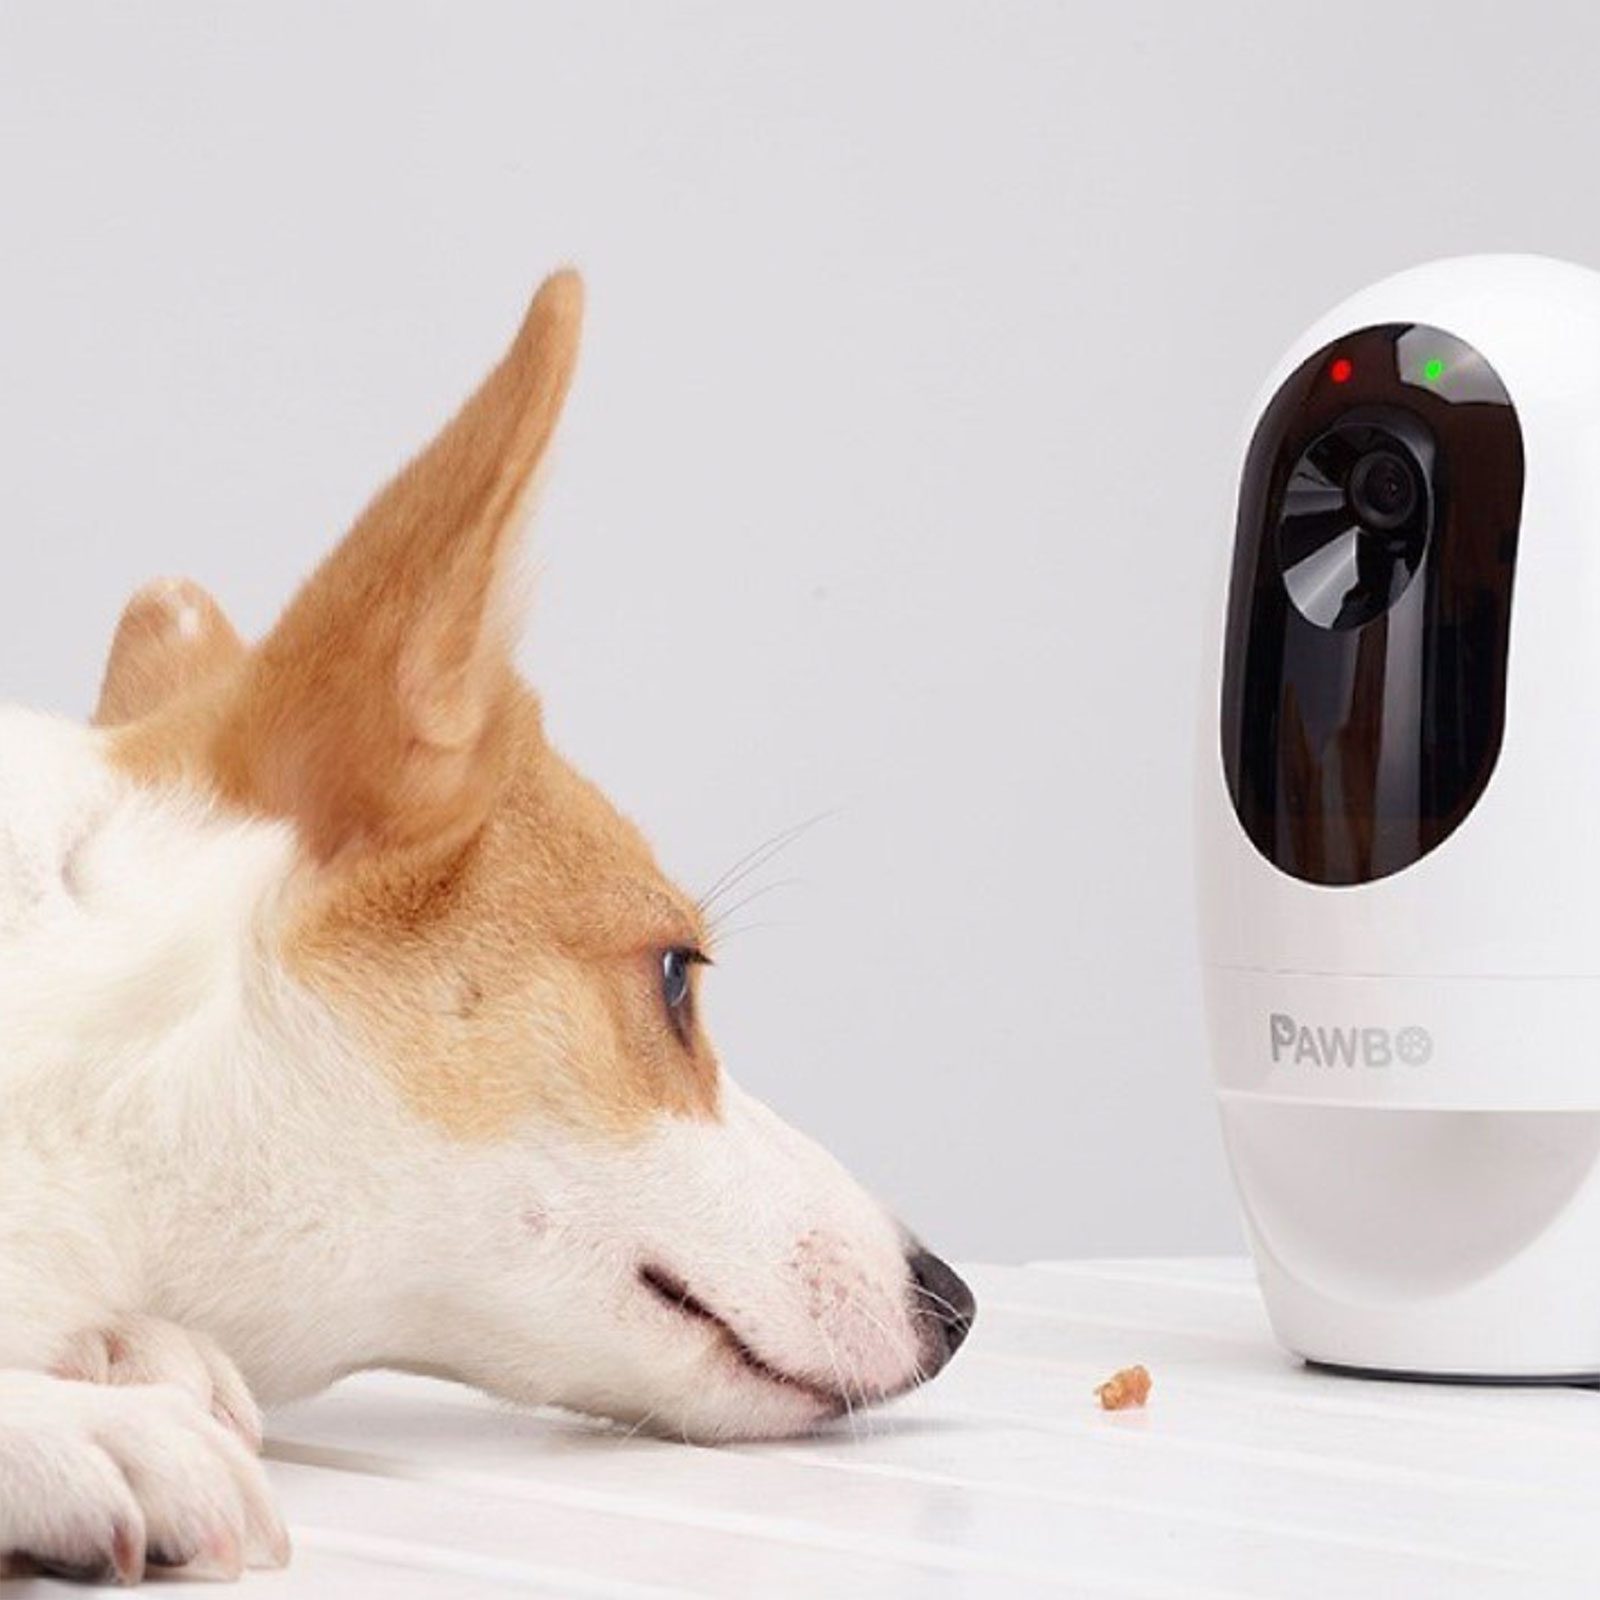 Best pet camera for cats: Pawbo Life